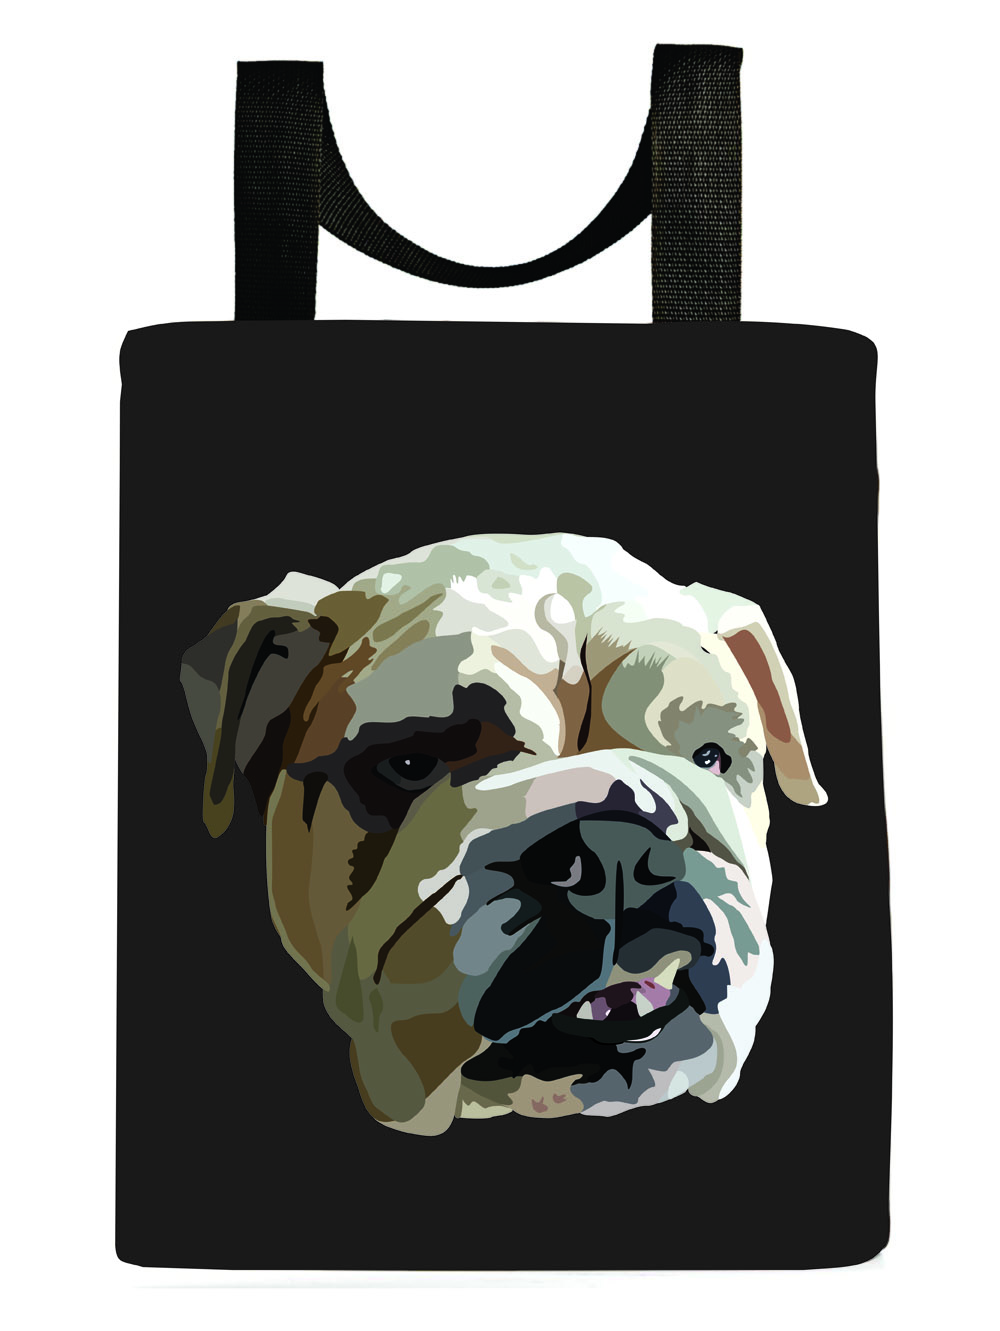 Reuseable Tote Bag made from Recycled Materials Boston Terrier